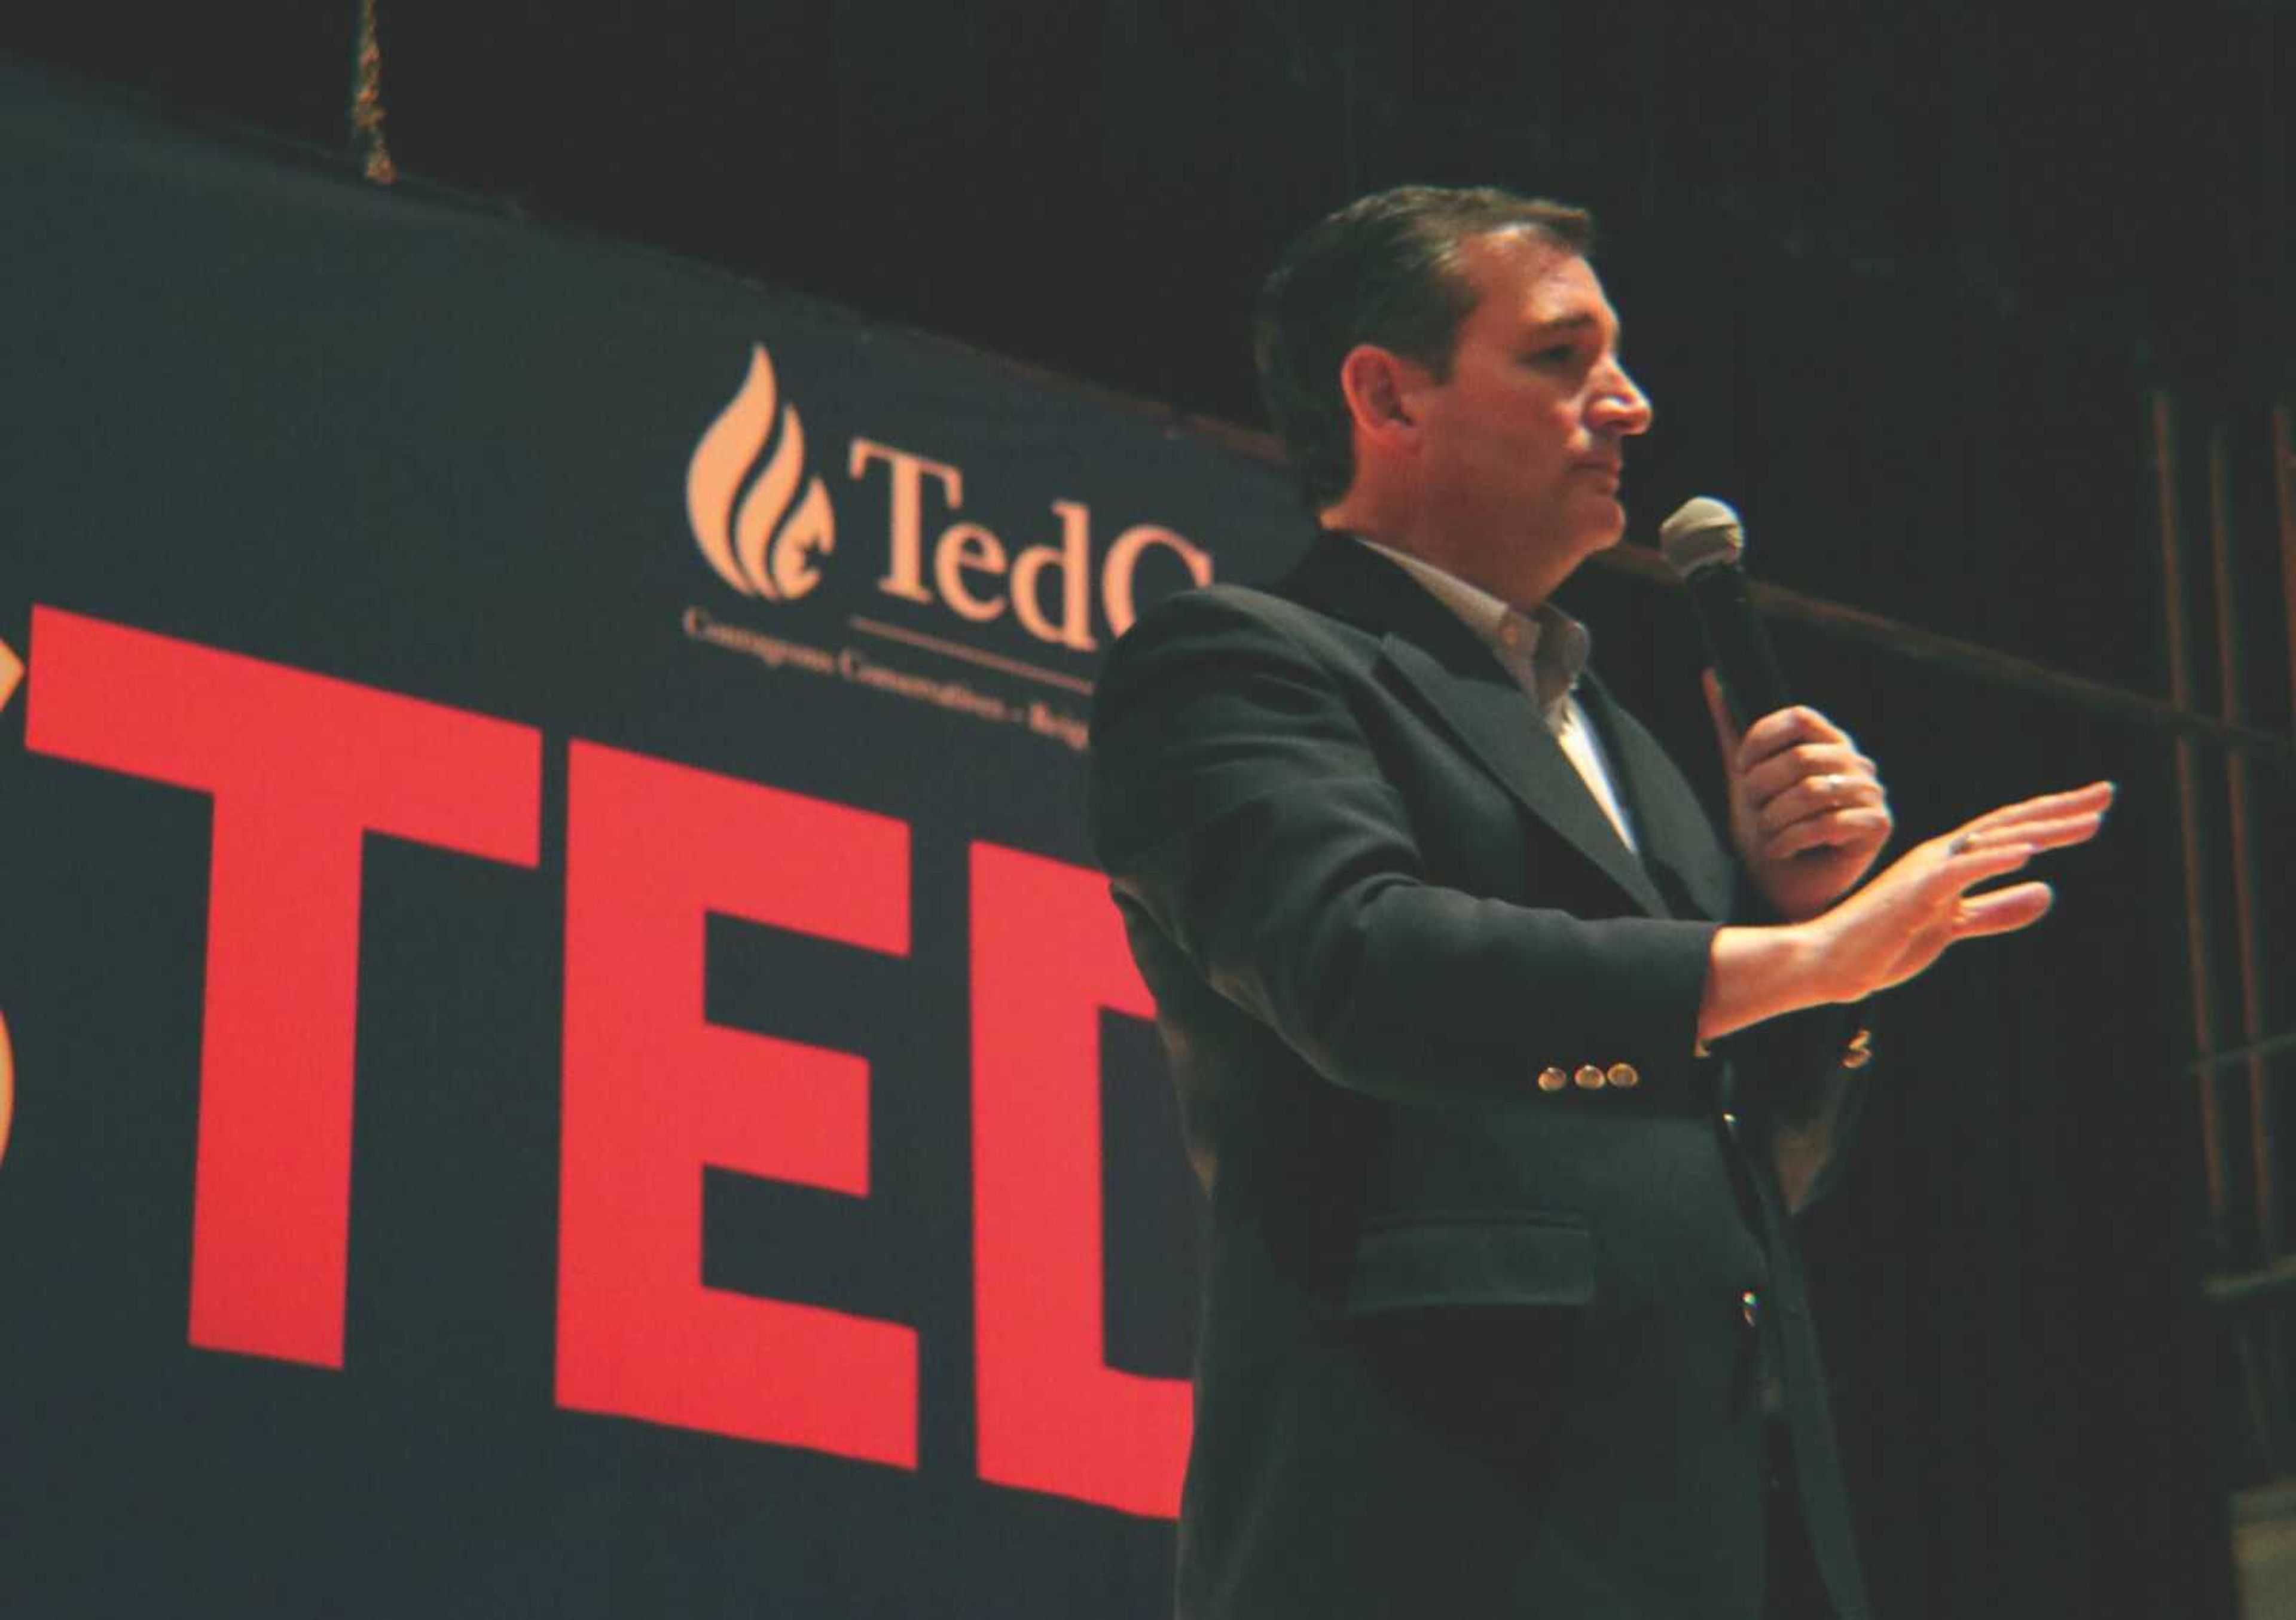 Republican presidential candidate Ted Cruz speaks at a rally on March 12 in Southeast Missouri State University's Academic Hall.